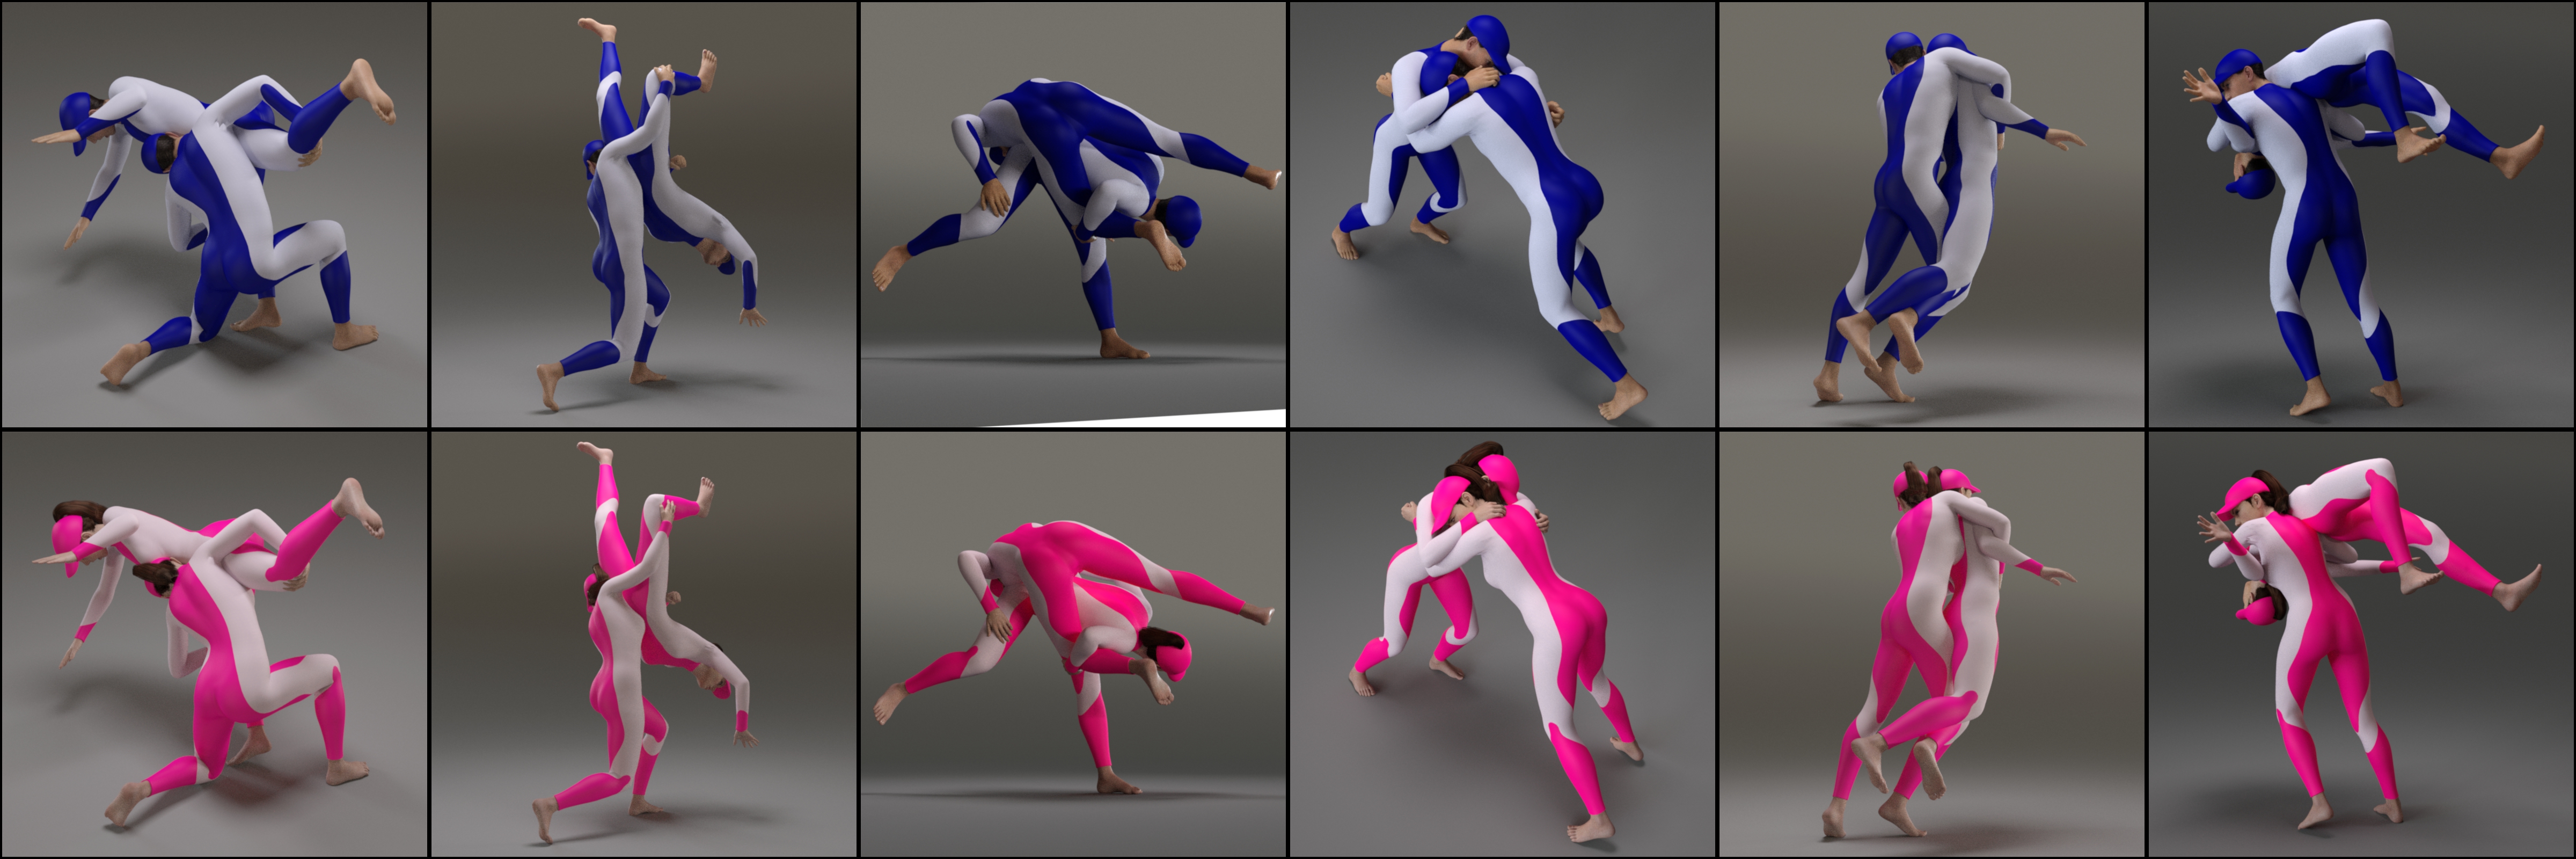 Grappling Poses Volume 6 for Genesis 8 and 8.1 by: atrilliongames, 3D Models by Daz 3D